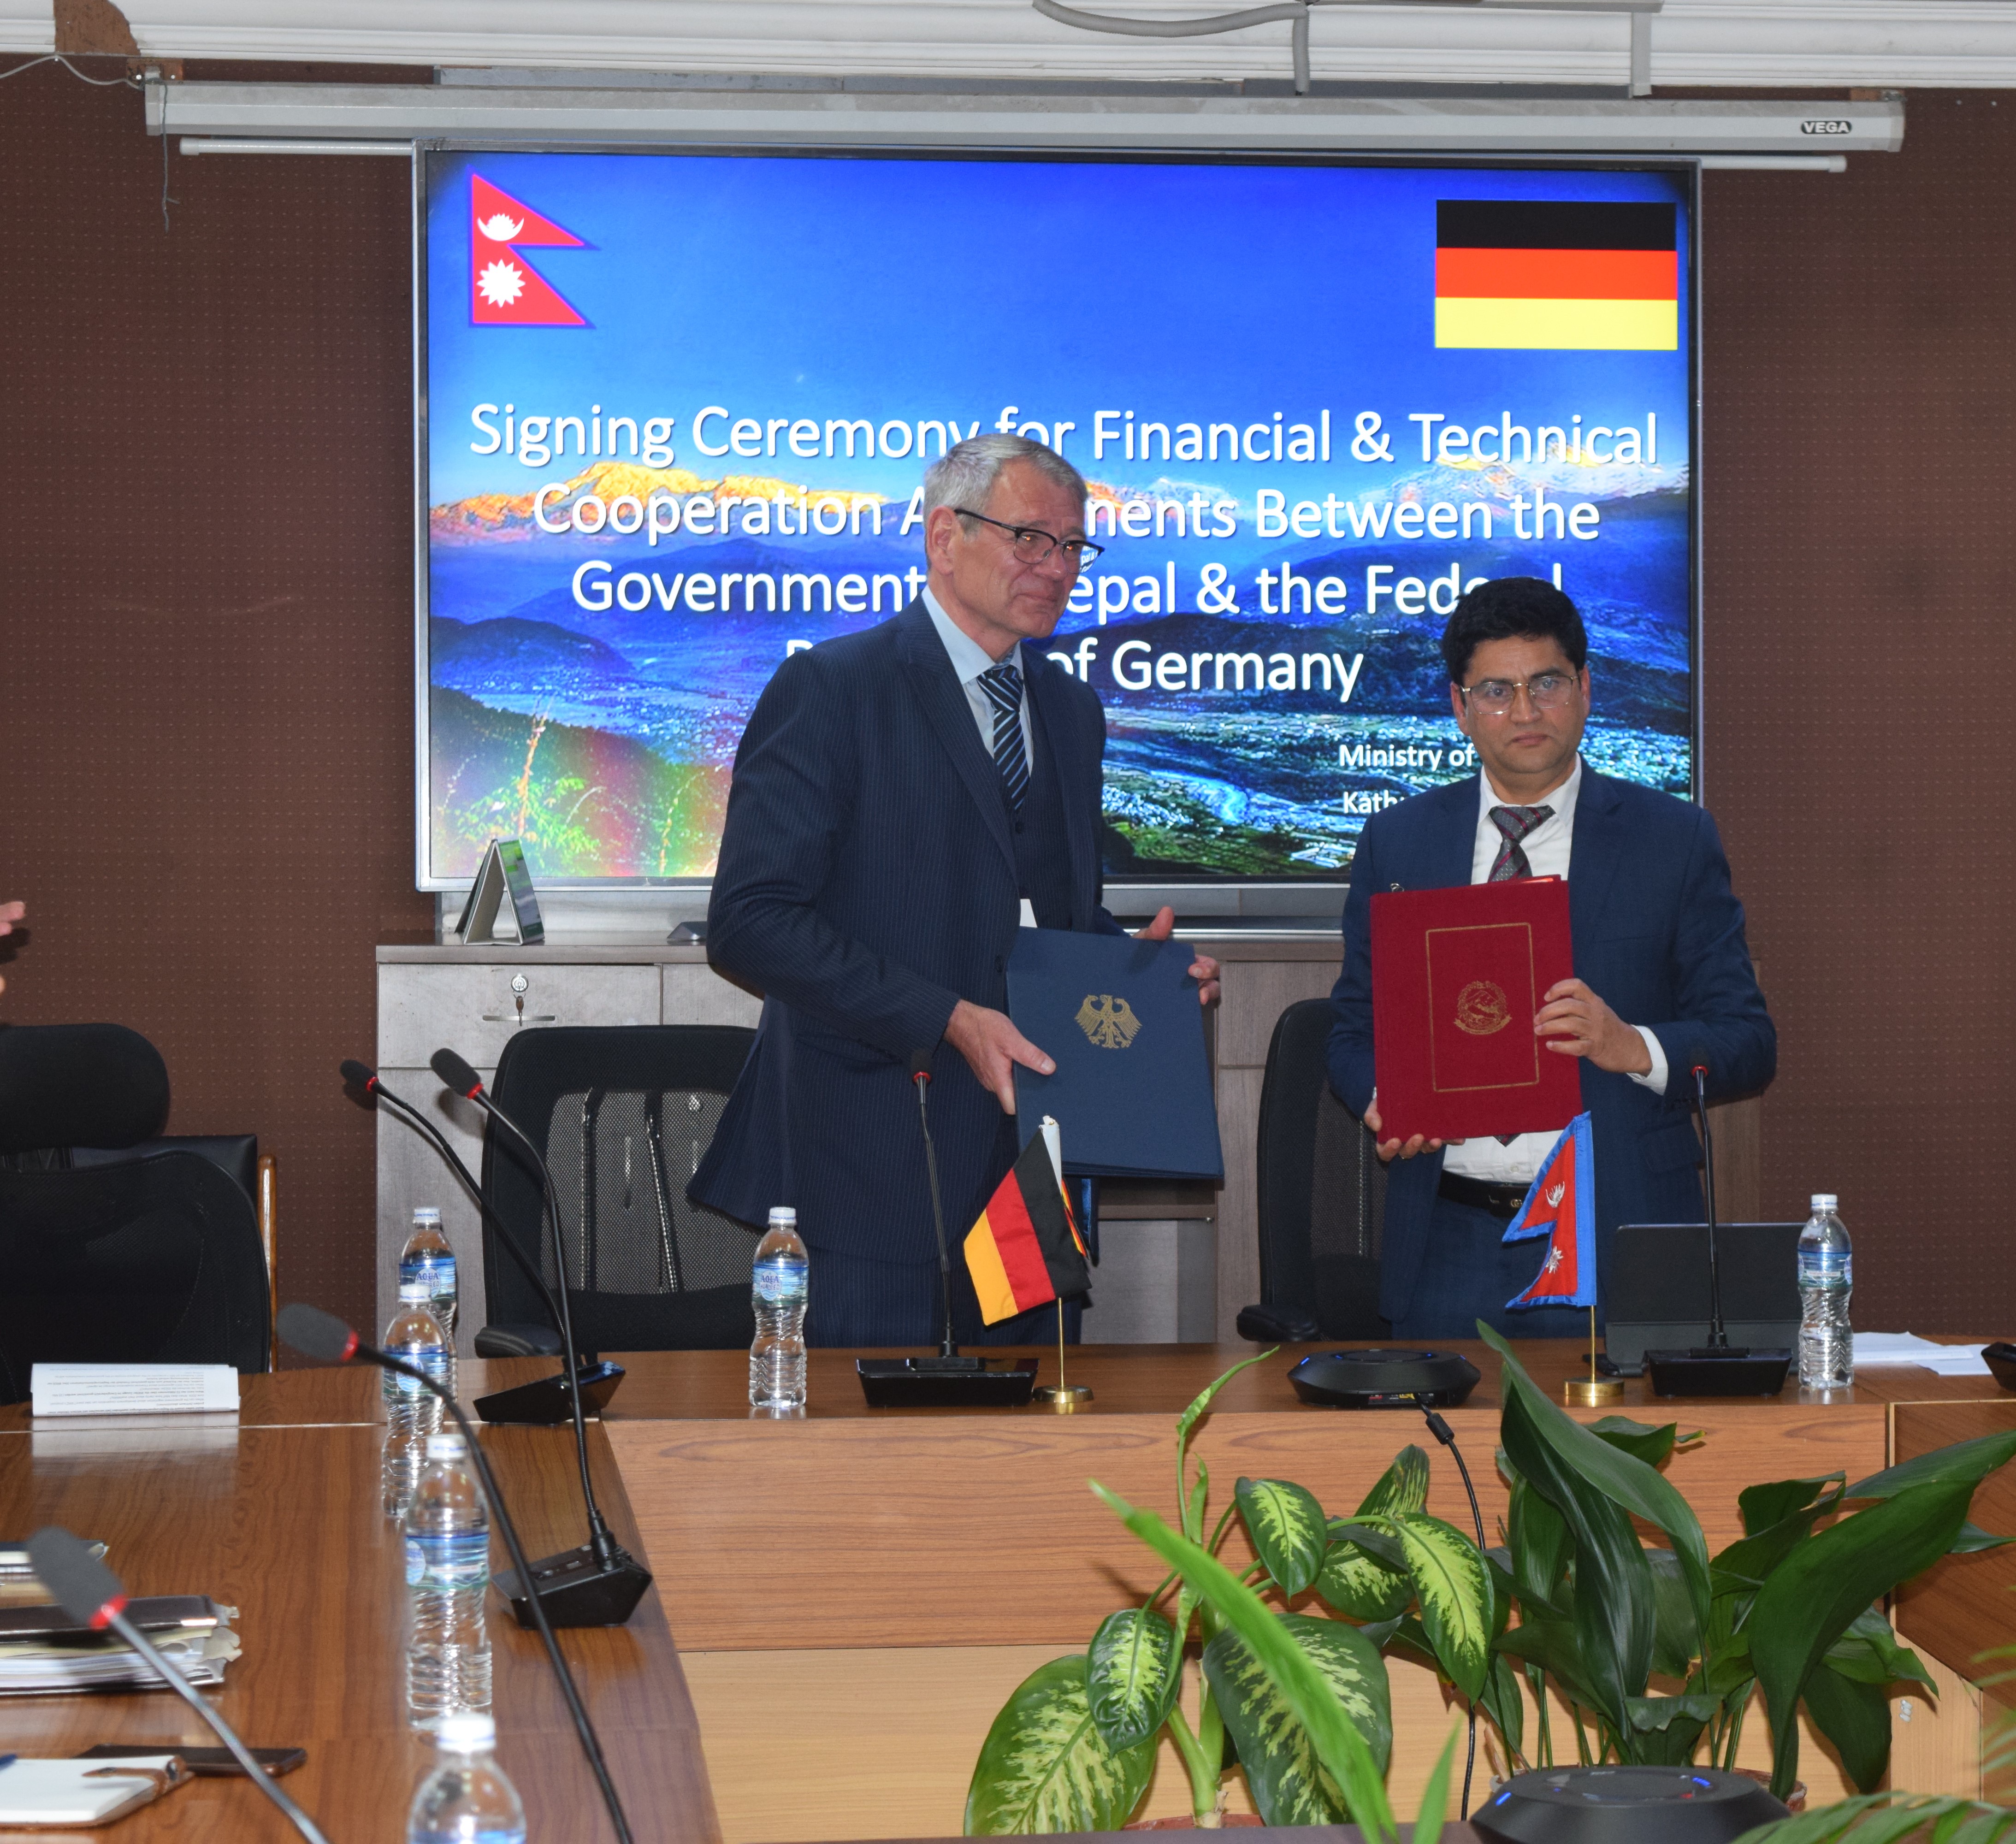 Nepal and Germany sign Financial and Technical Cooperation Agreements totaling 56 million Euros